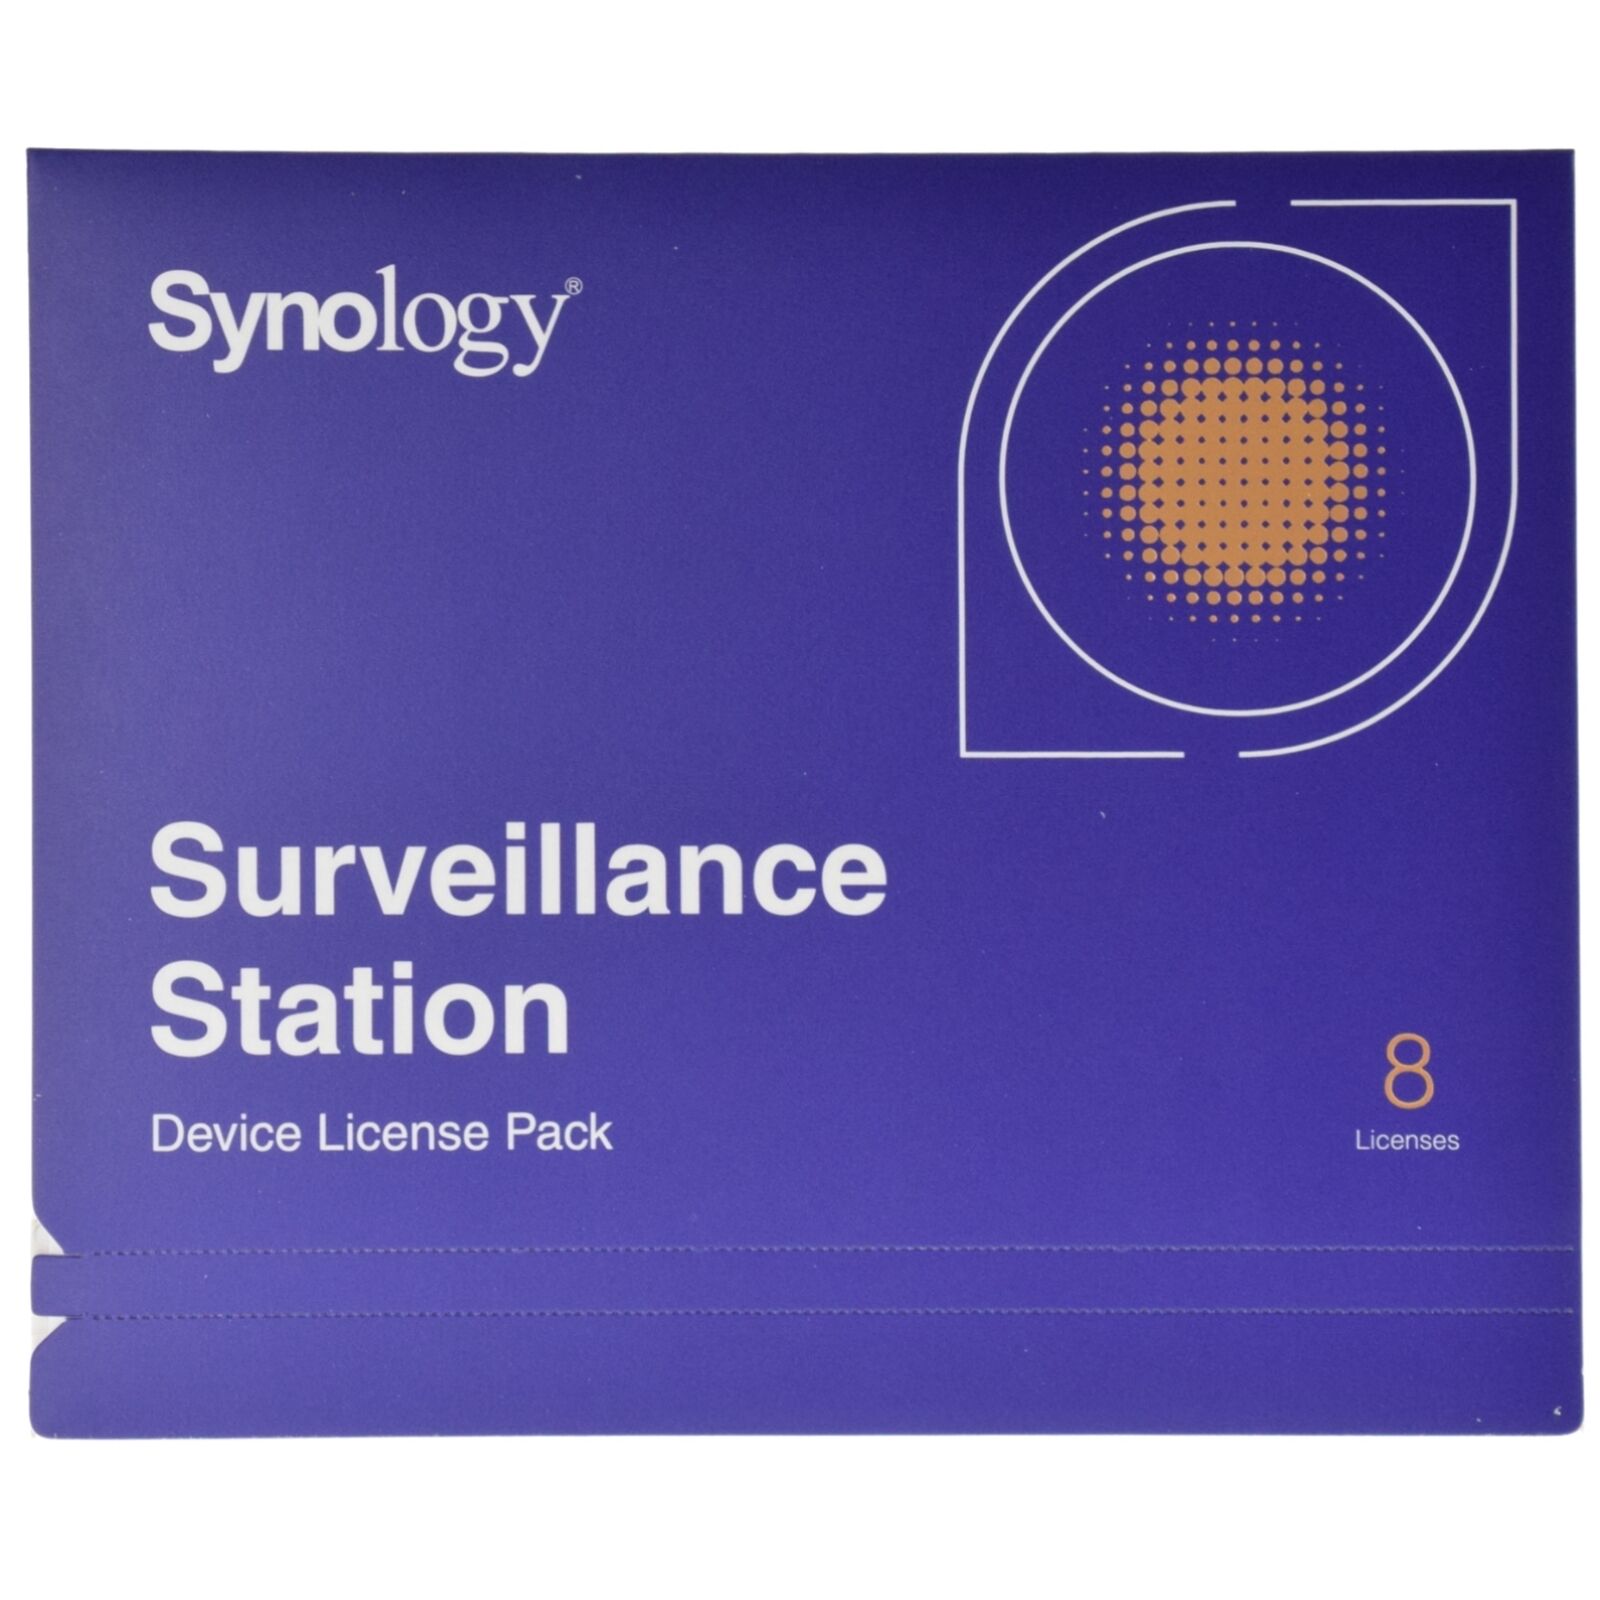 Synology IP Camera 8-License Pack Kit for Surveillance Station - DS1618+ DS718+